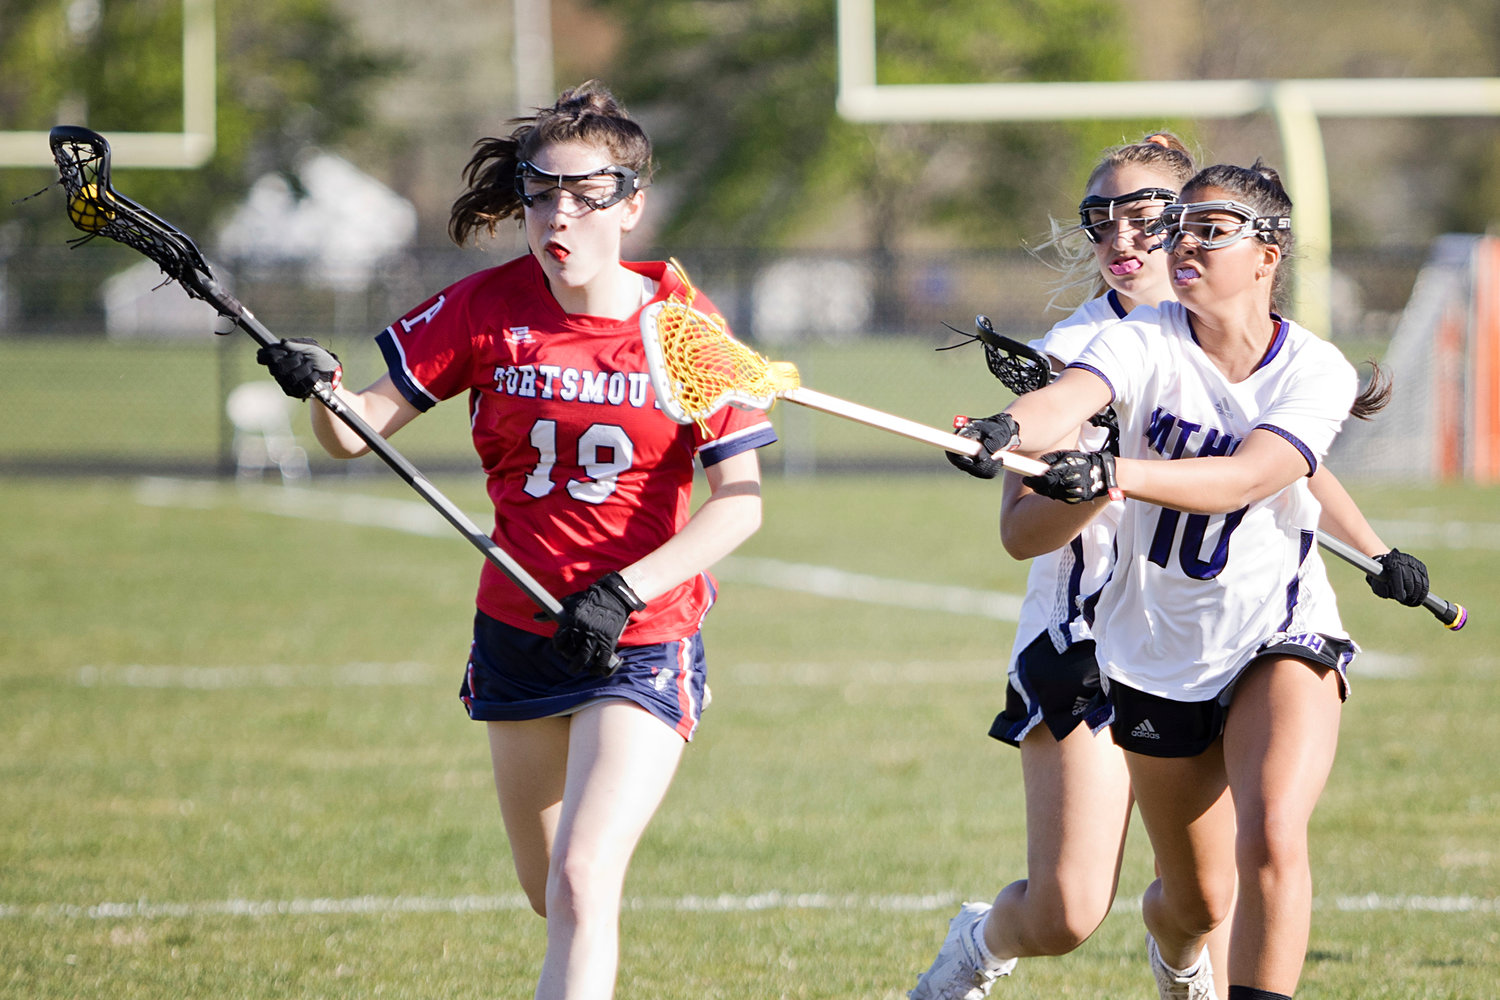 Nora Cooney is pressured by Mt. Hope's Isabelle Correira while  advancing the ball toward the goal.